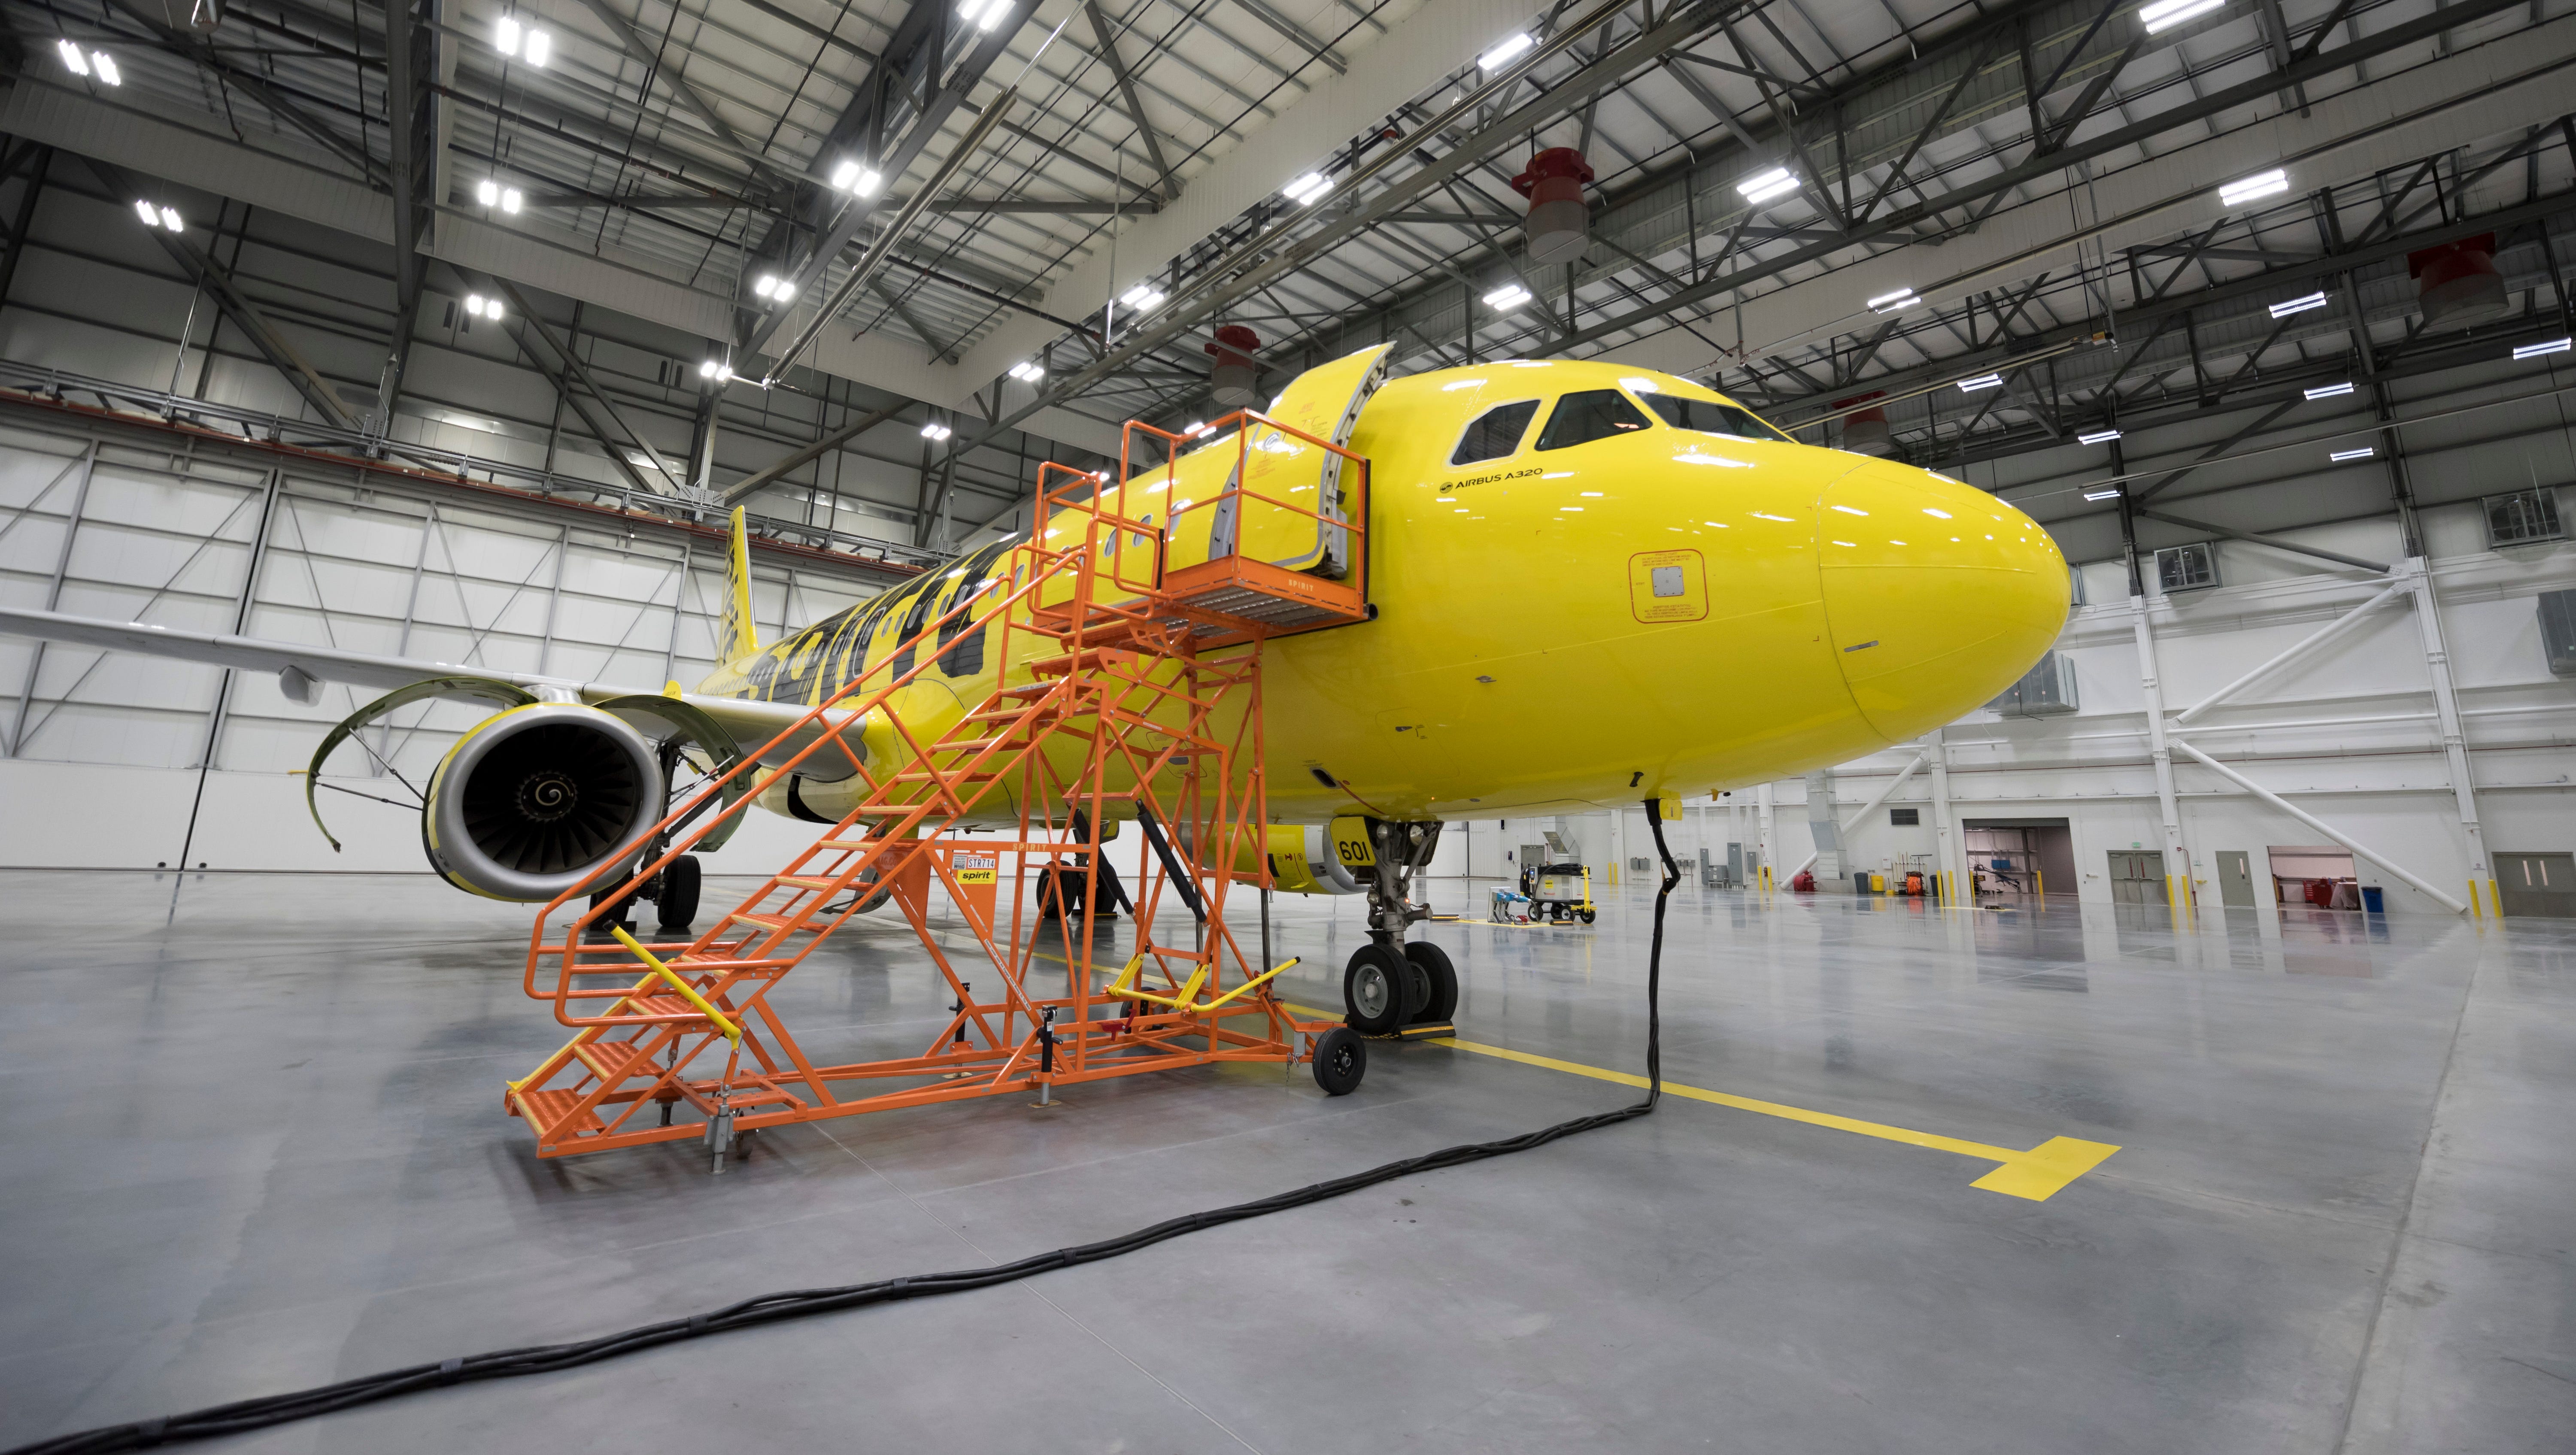 An A320 "operational spare" airplane sits in the main hangar bay for the new maintenance hangar for Spirit Airlines next to Detroit Metropolitan Airport in Romulus, May 8, 2017.